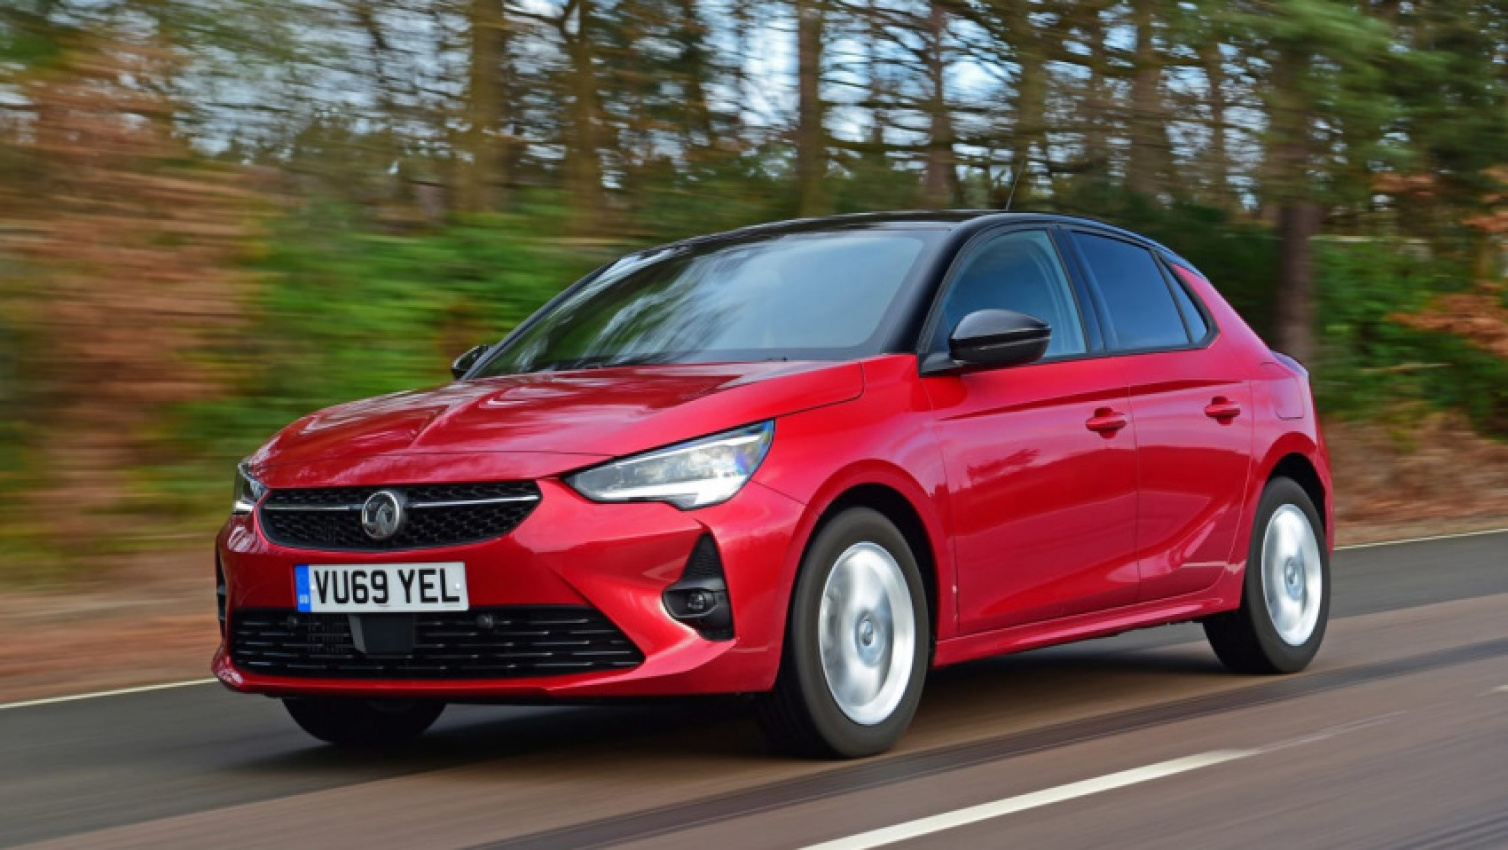 android, autos, cars, ford, reviews, volkswagen, compare cars, corsa-e hatchback, fiesta hatchback, fiesta st hatchback, ford fiesta, polo hatchback, superminis, volkswagen polo, android, volkswagen polo vs ford fiesta vs vauxhall corsa: which should you buy?